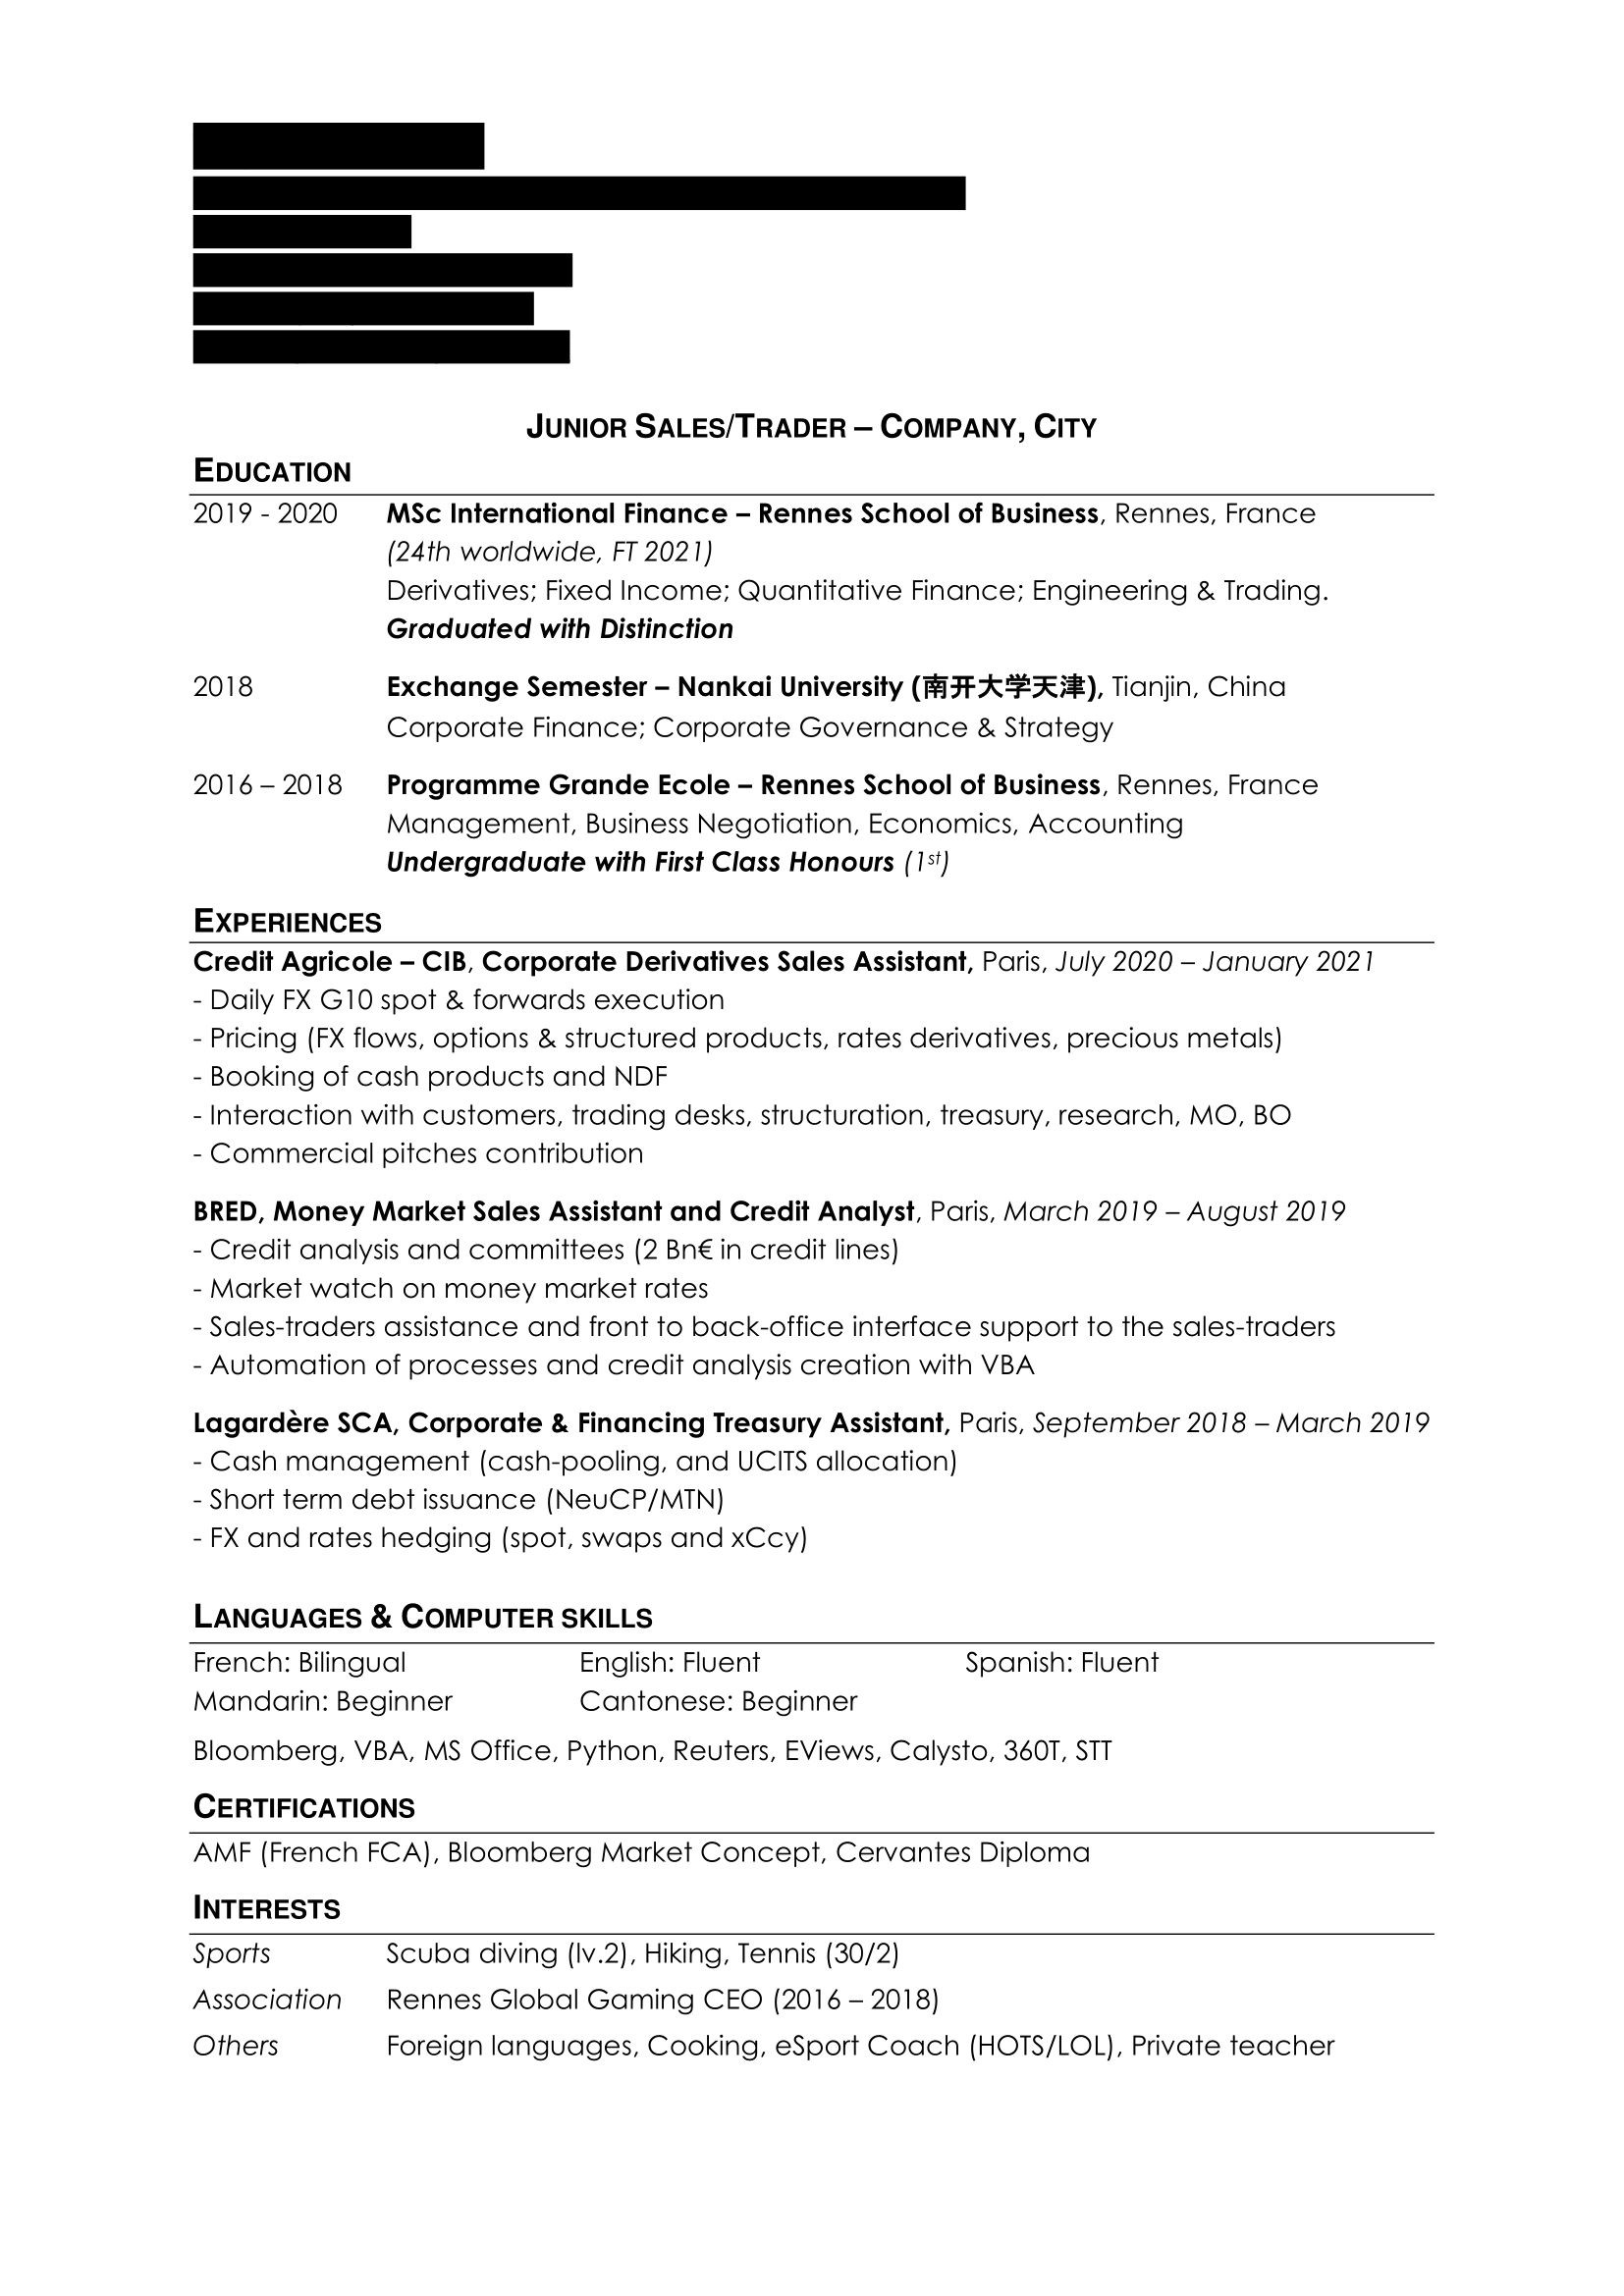 Resume for S&T analyst position